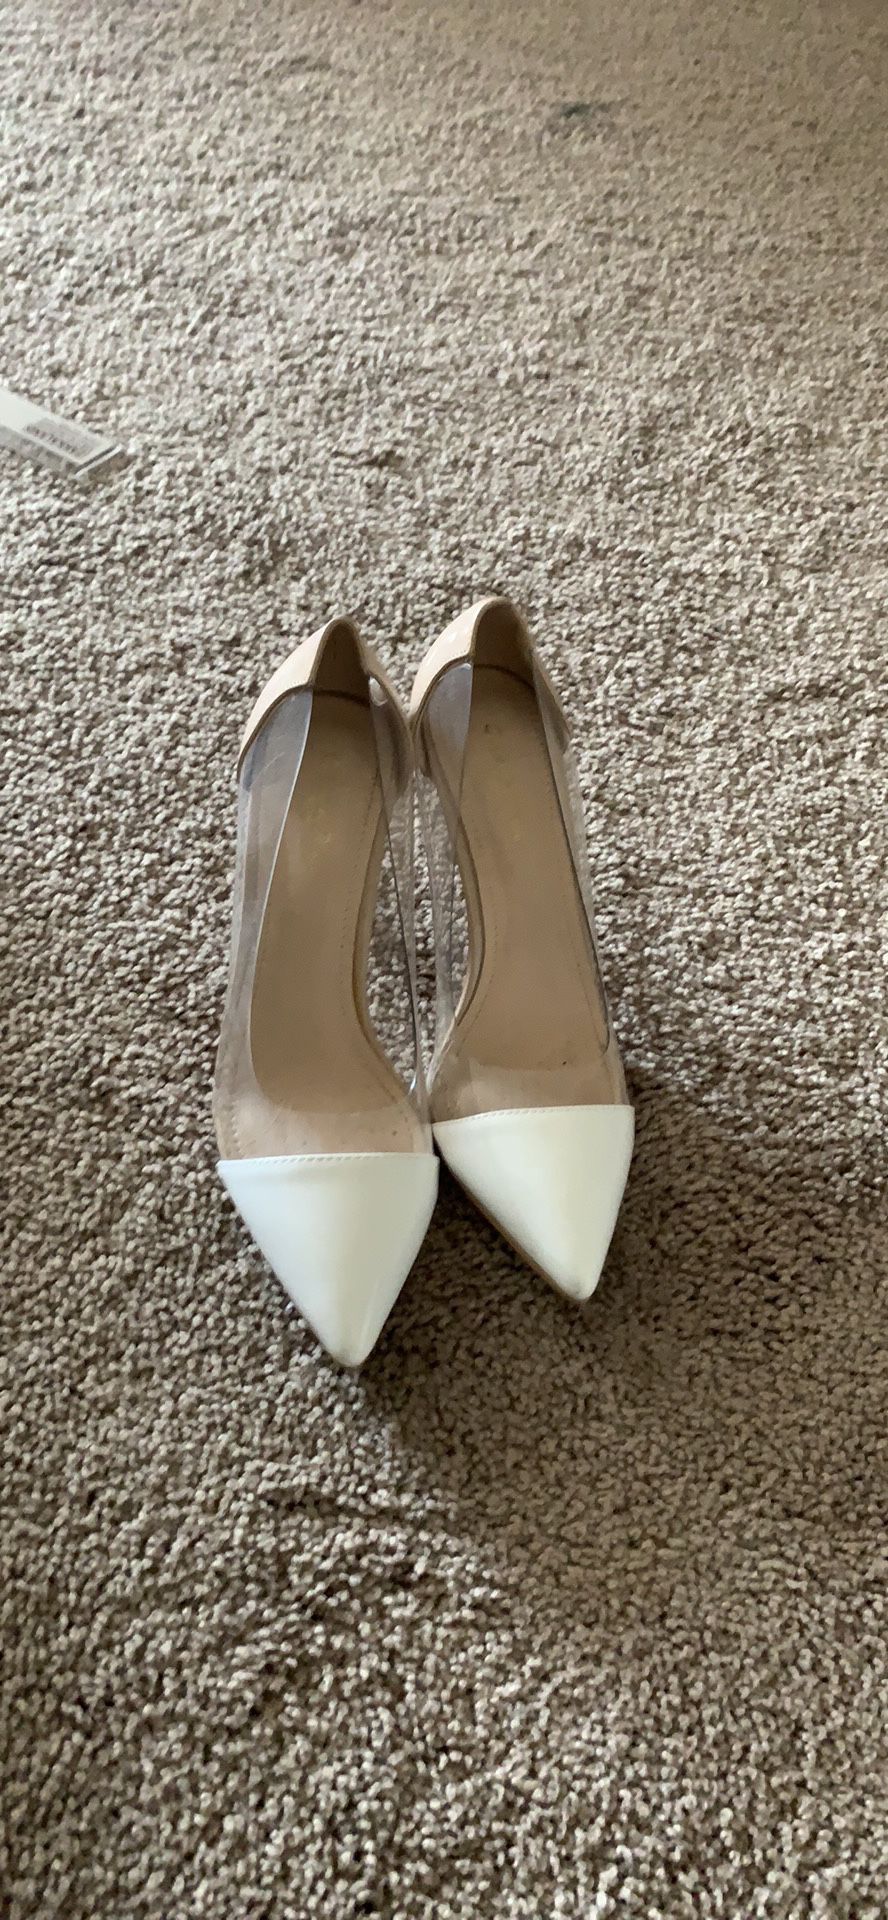 【ONLY wore ONCE】Gianvito Rossi 85mm PVC heels